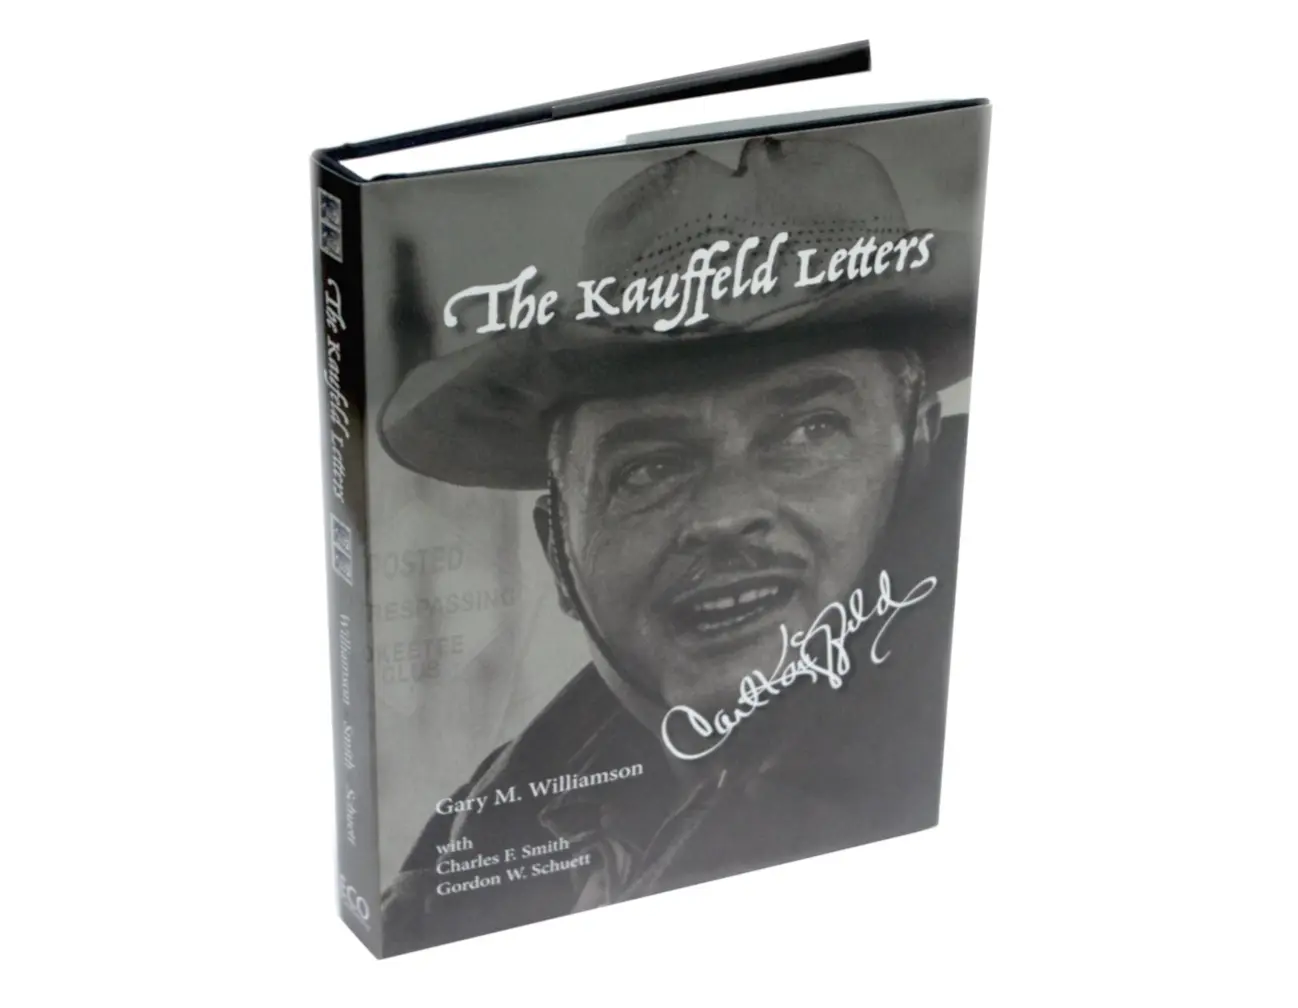 A book cover with an image of a man in a cowboy hat.